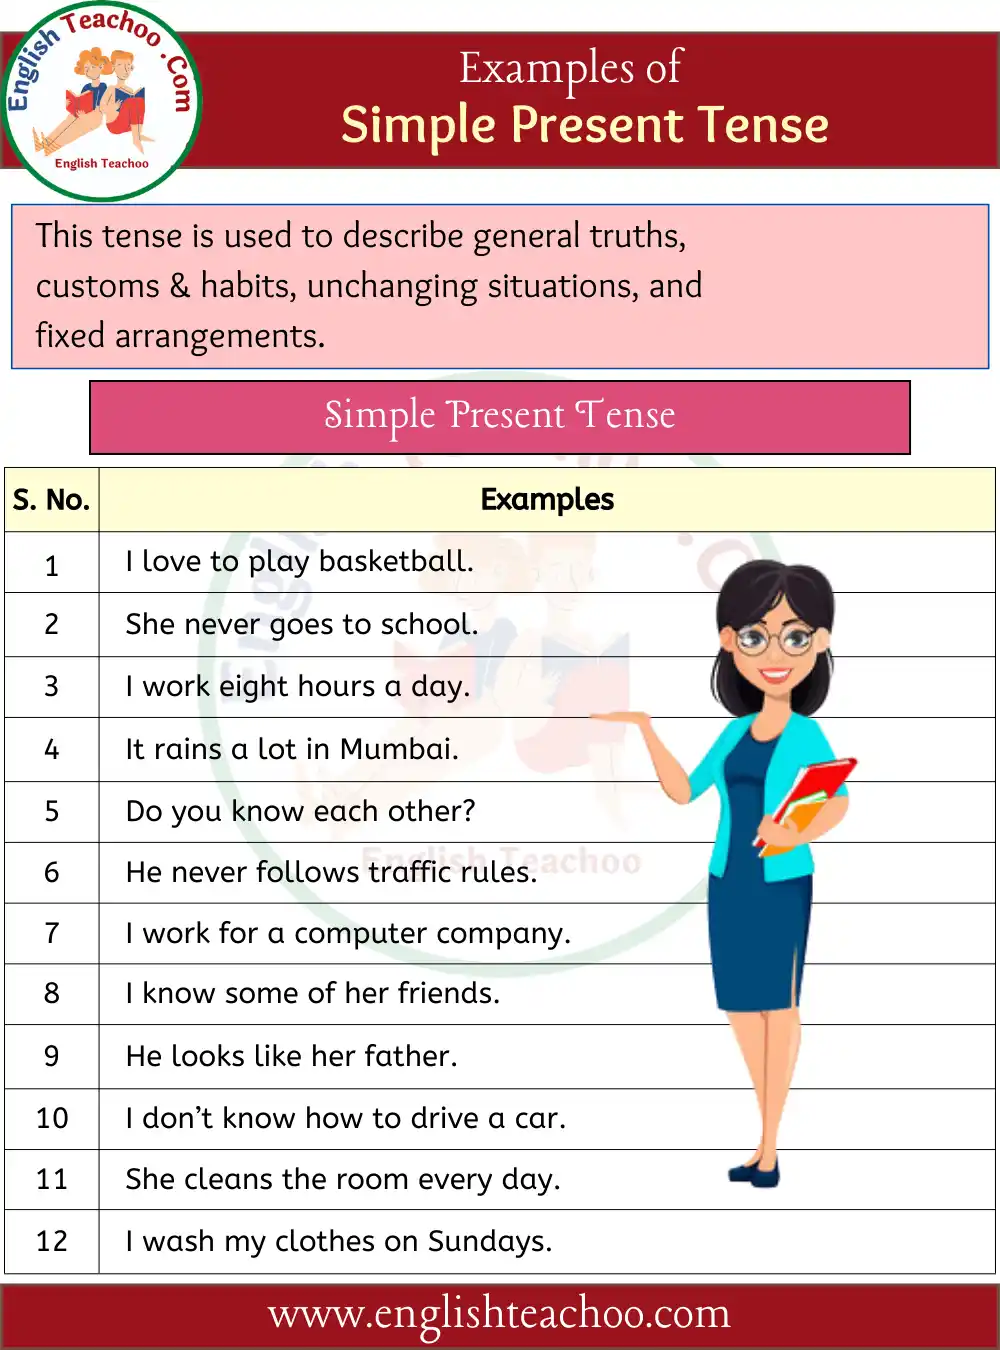 12 Examples of Simple Present Tense In Sentences Simple Present Tense Sentence Examples